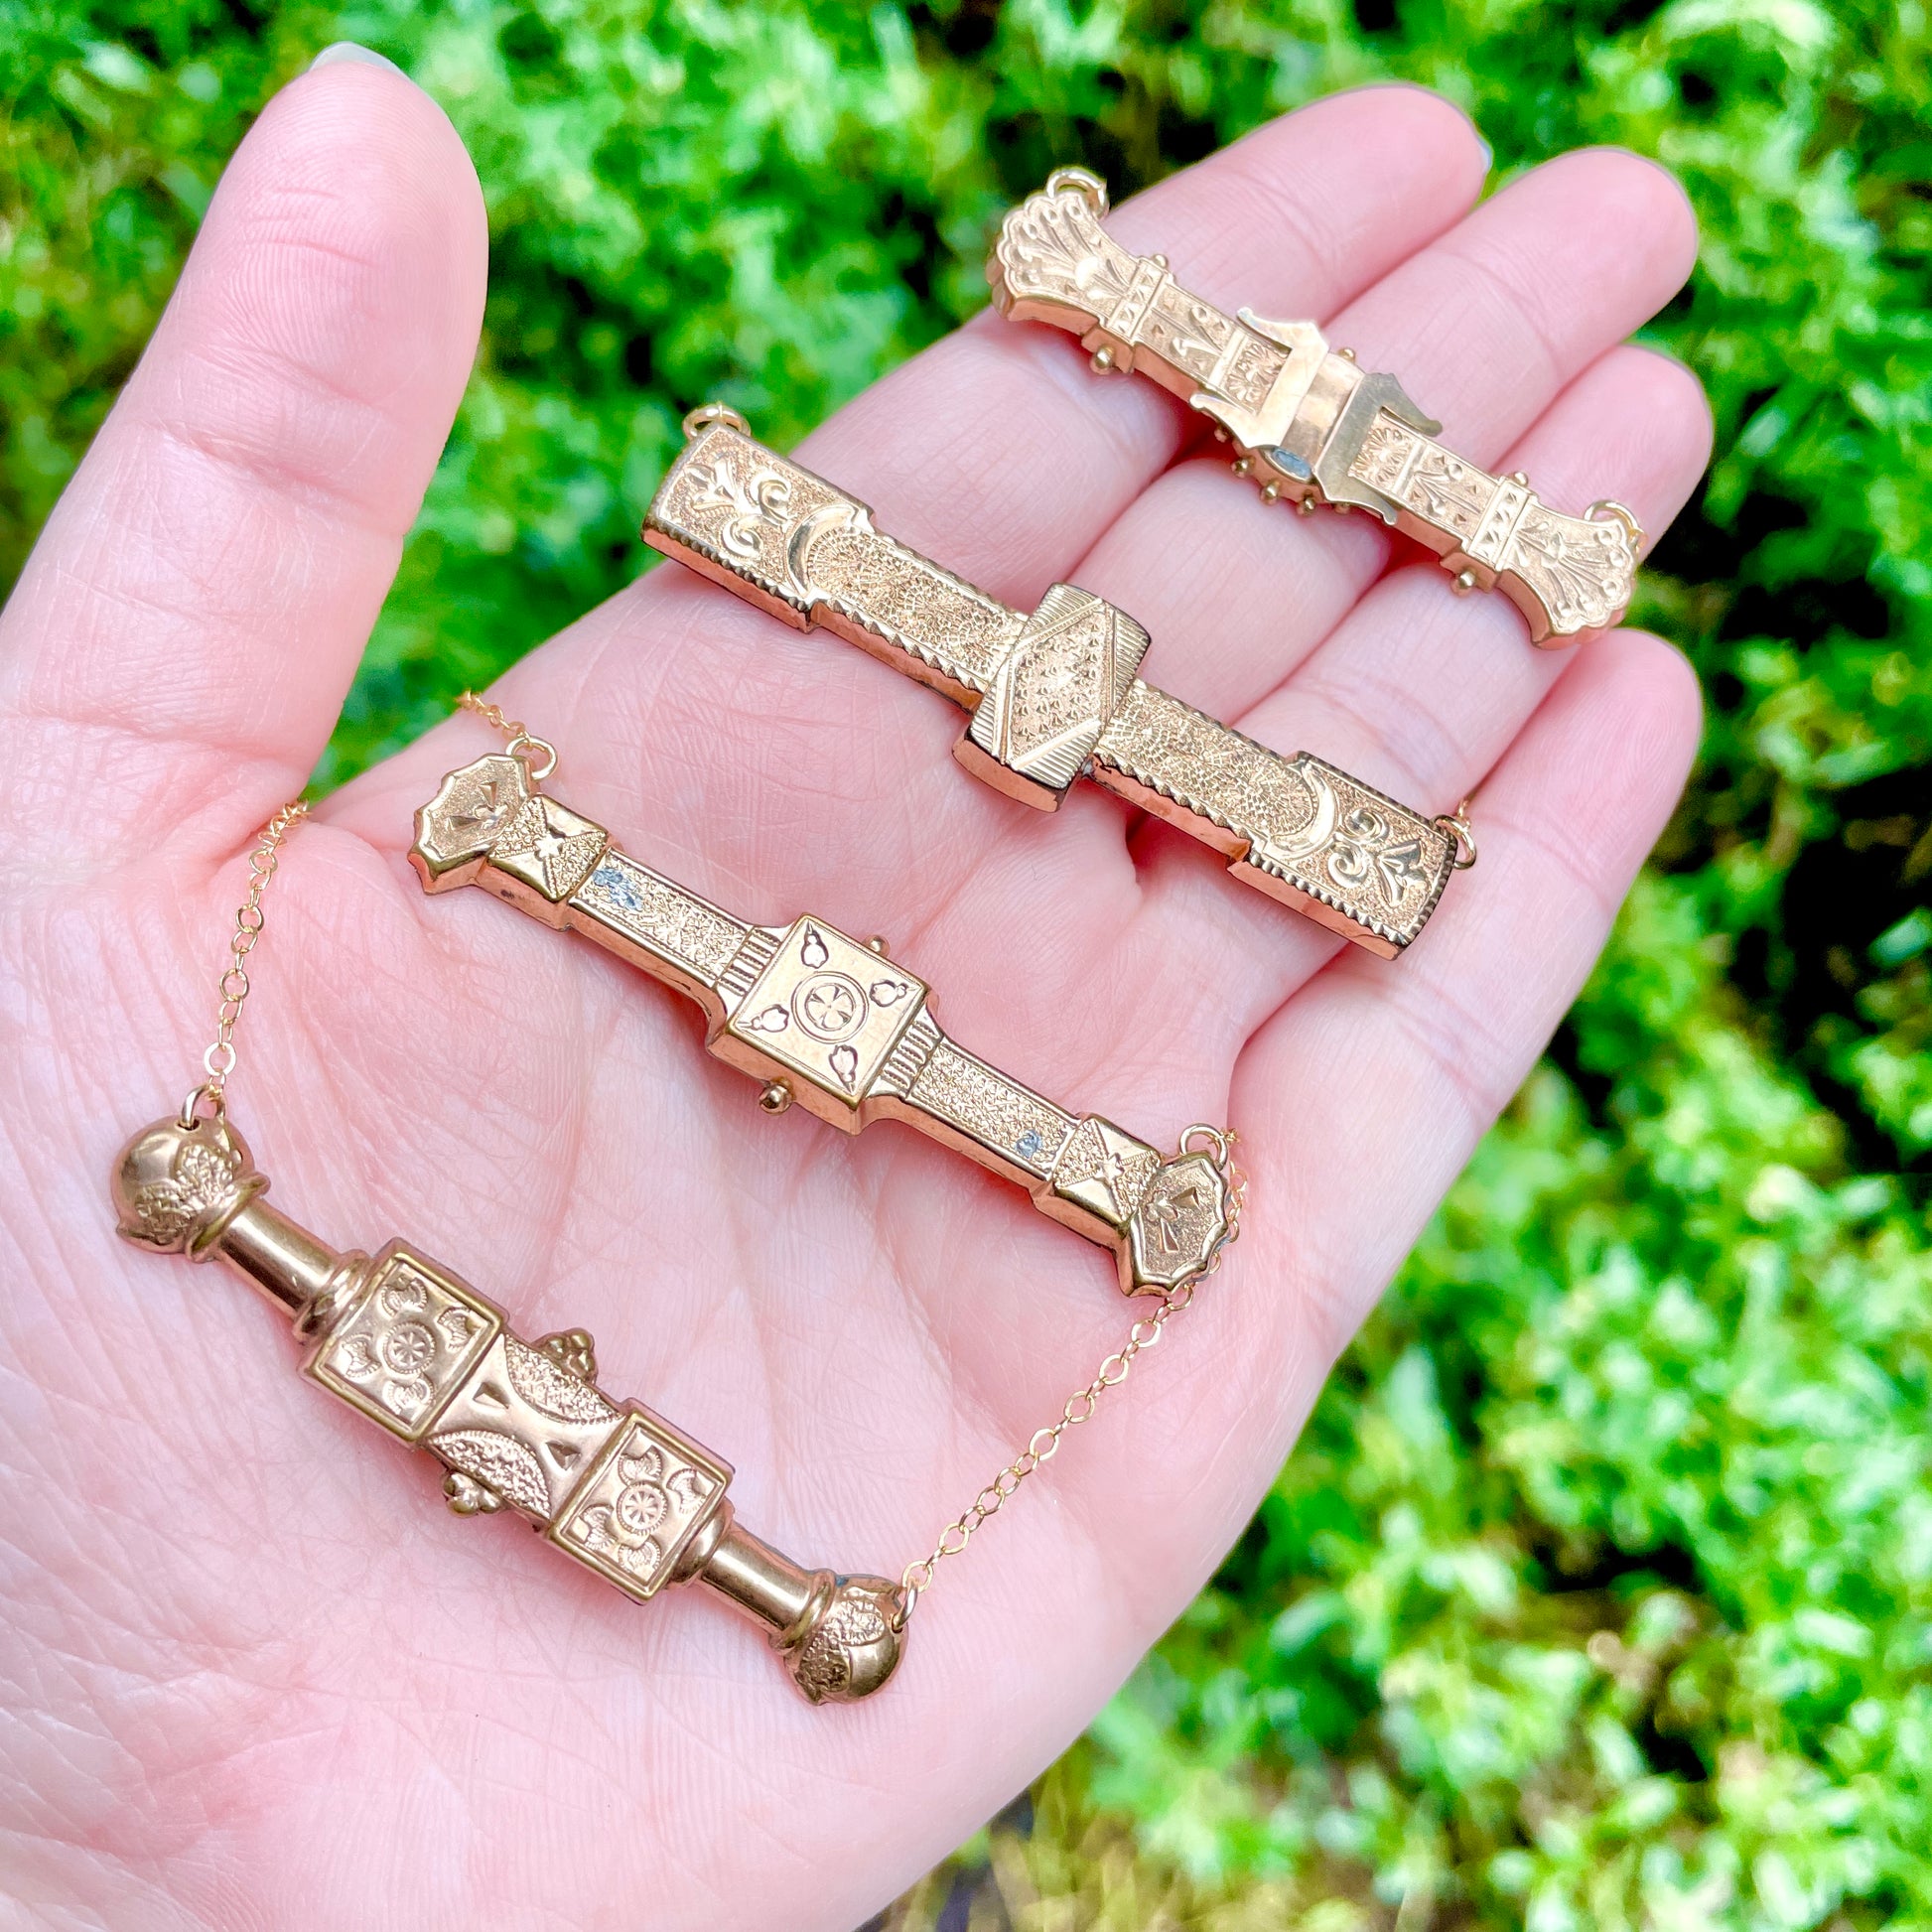 Four antique Victorian bar pin necklaces laying across the palm and fingers of a left hand with green shrubbery in the background. 